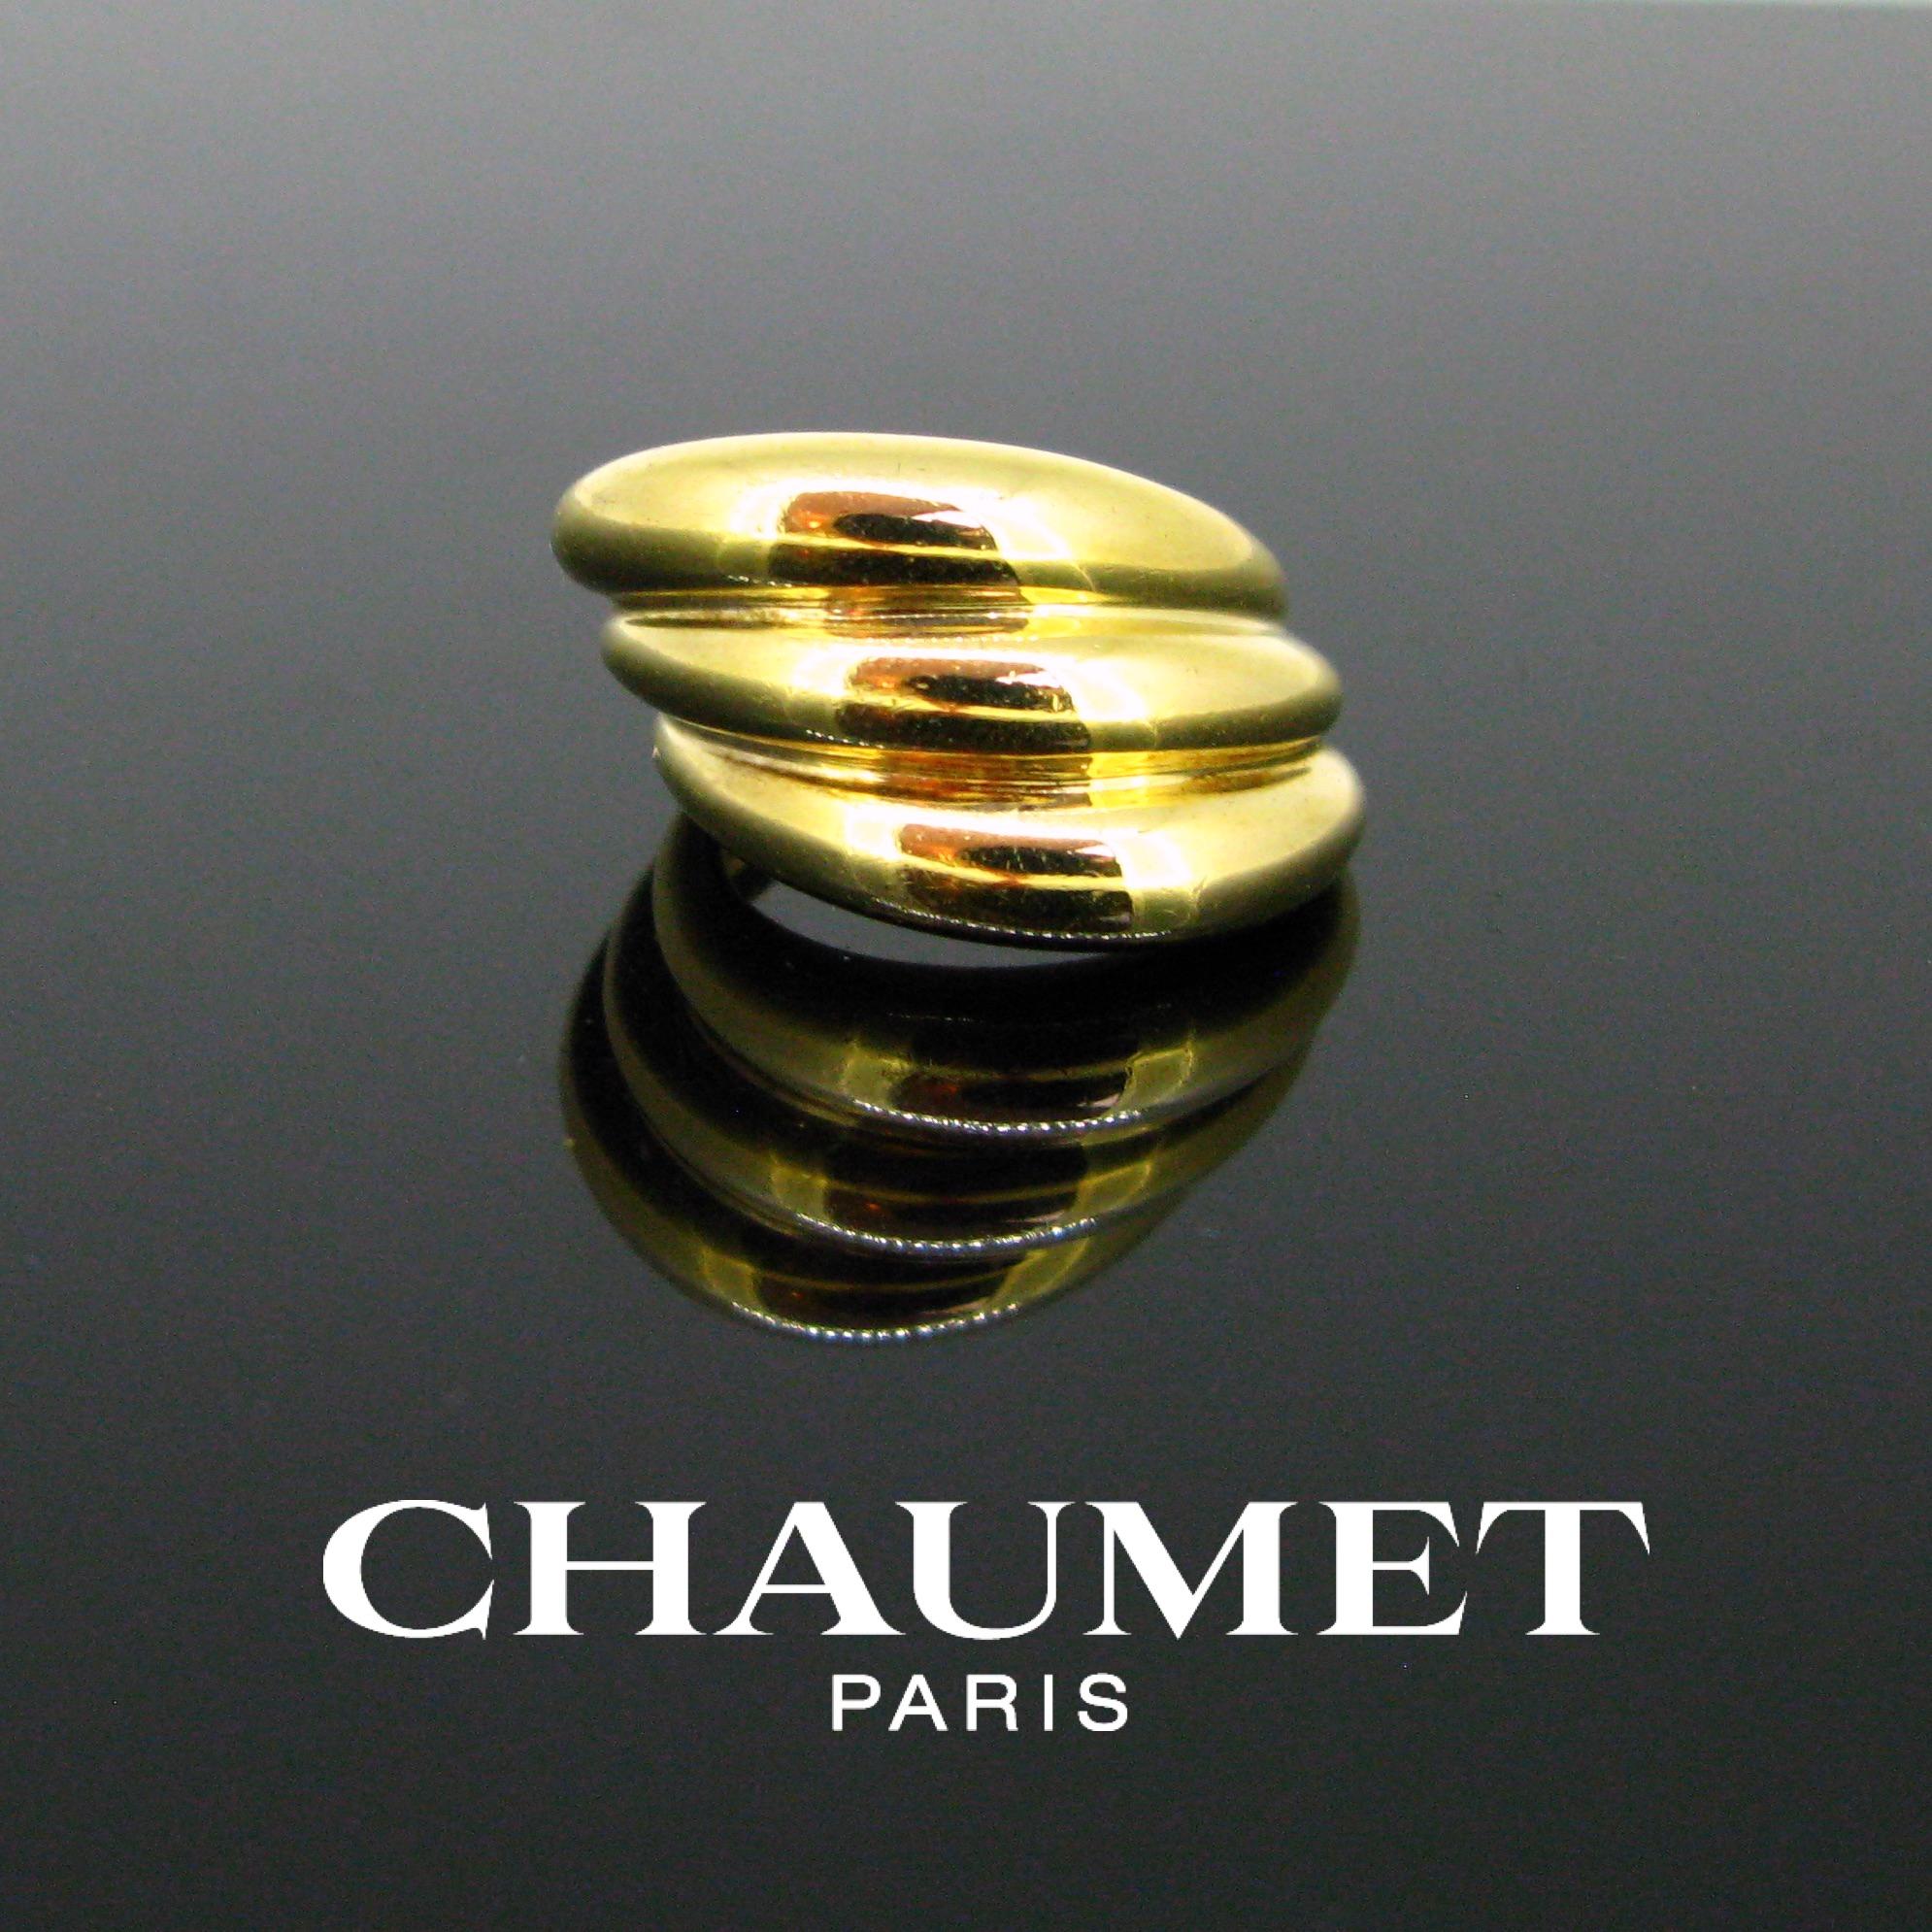 Weight:	11.95gr


Metal:	18kt yellow gold	


Condition:	Very Good


Signature:	Chaumet, nº144189


Hallmarks:	French, eagle’s head


Size:	49 – 5 - J  


Comments: 	 This beautiful ring is made in 18kt yellow gold. It is signed Chaumet and numbered